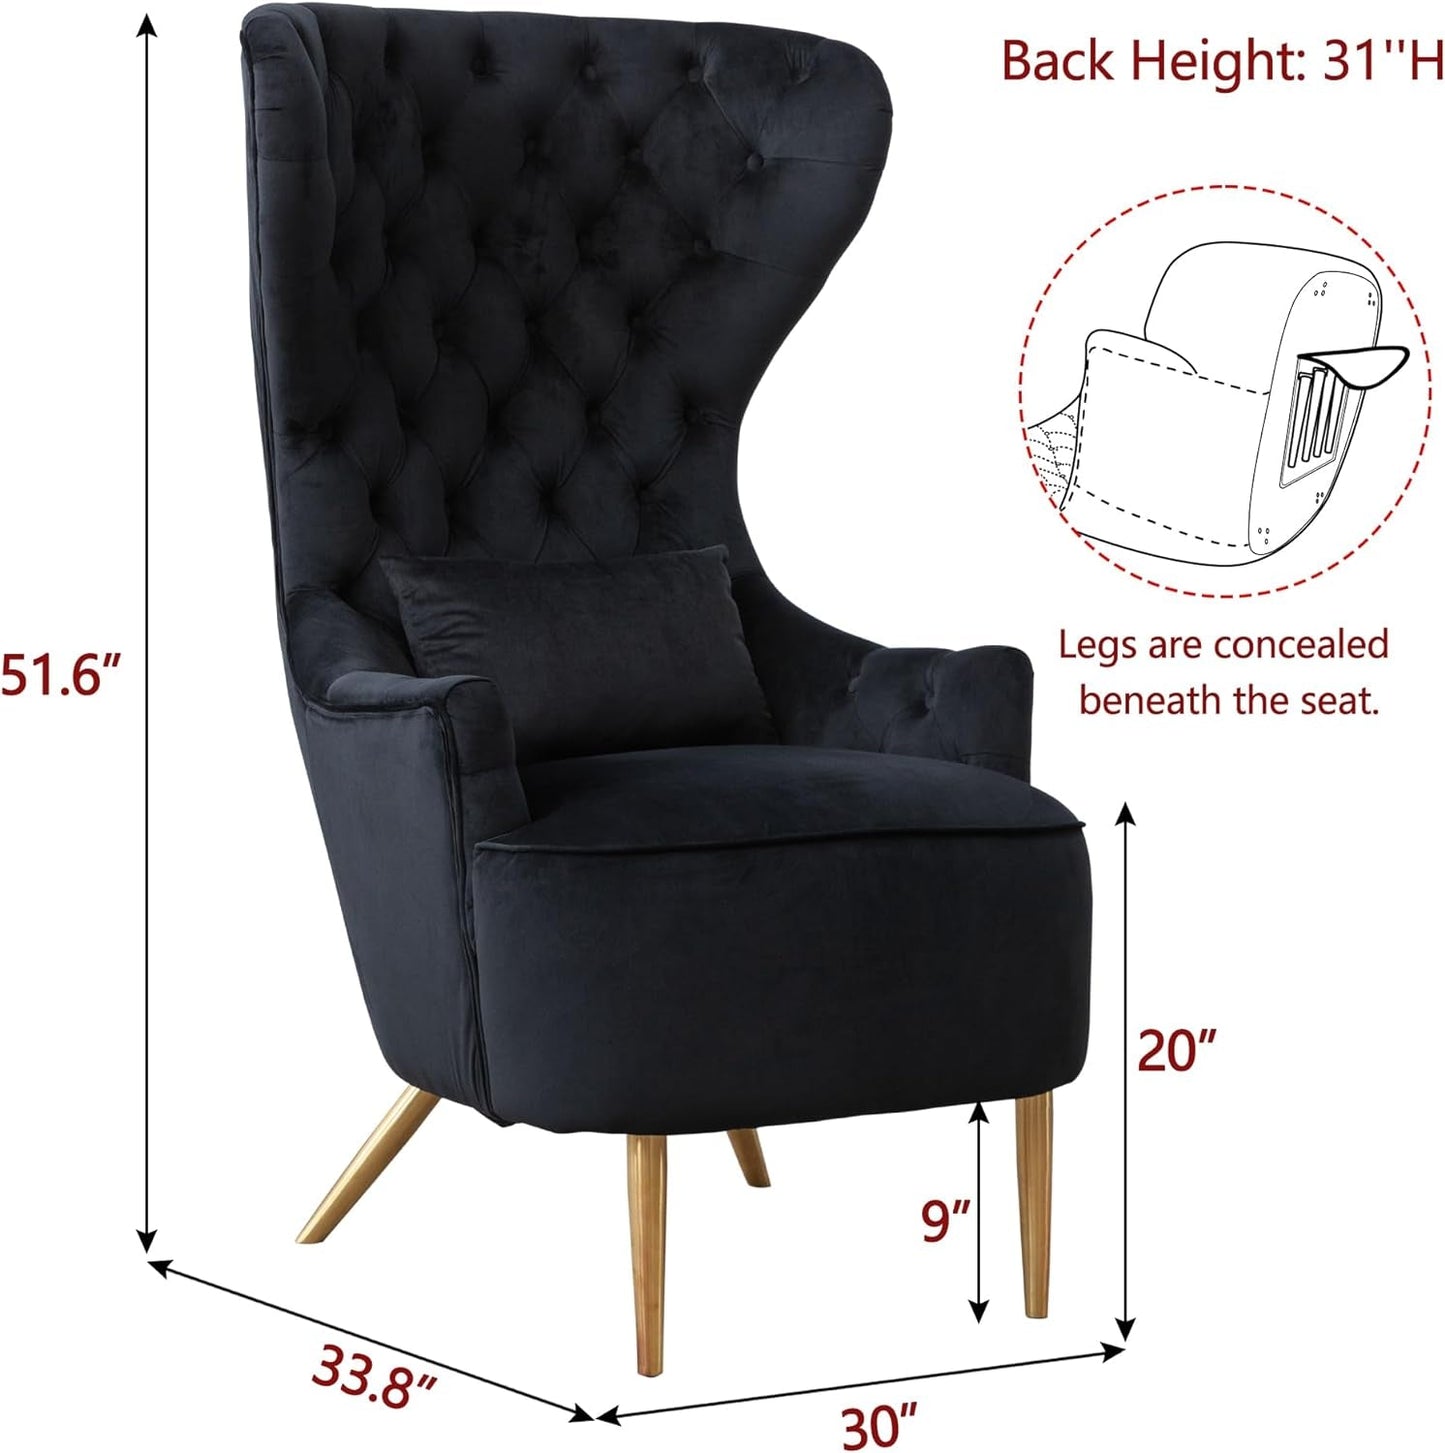 30" W Tufted Velvet Upholstered High Wingback Chair, Mid Century Modern Armchair Accent Chair with Toss Pillow Metal Legs for Living Room Bedroom Apartment Lounge Nursery, Black